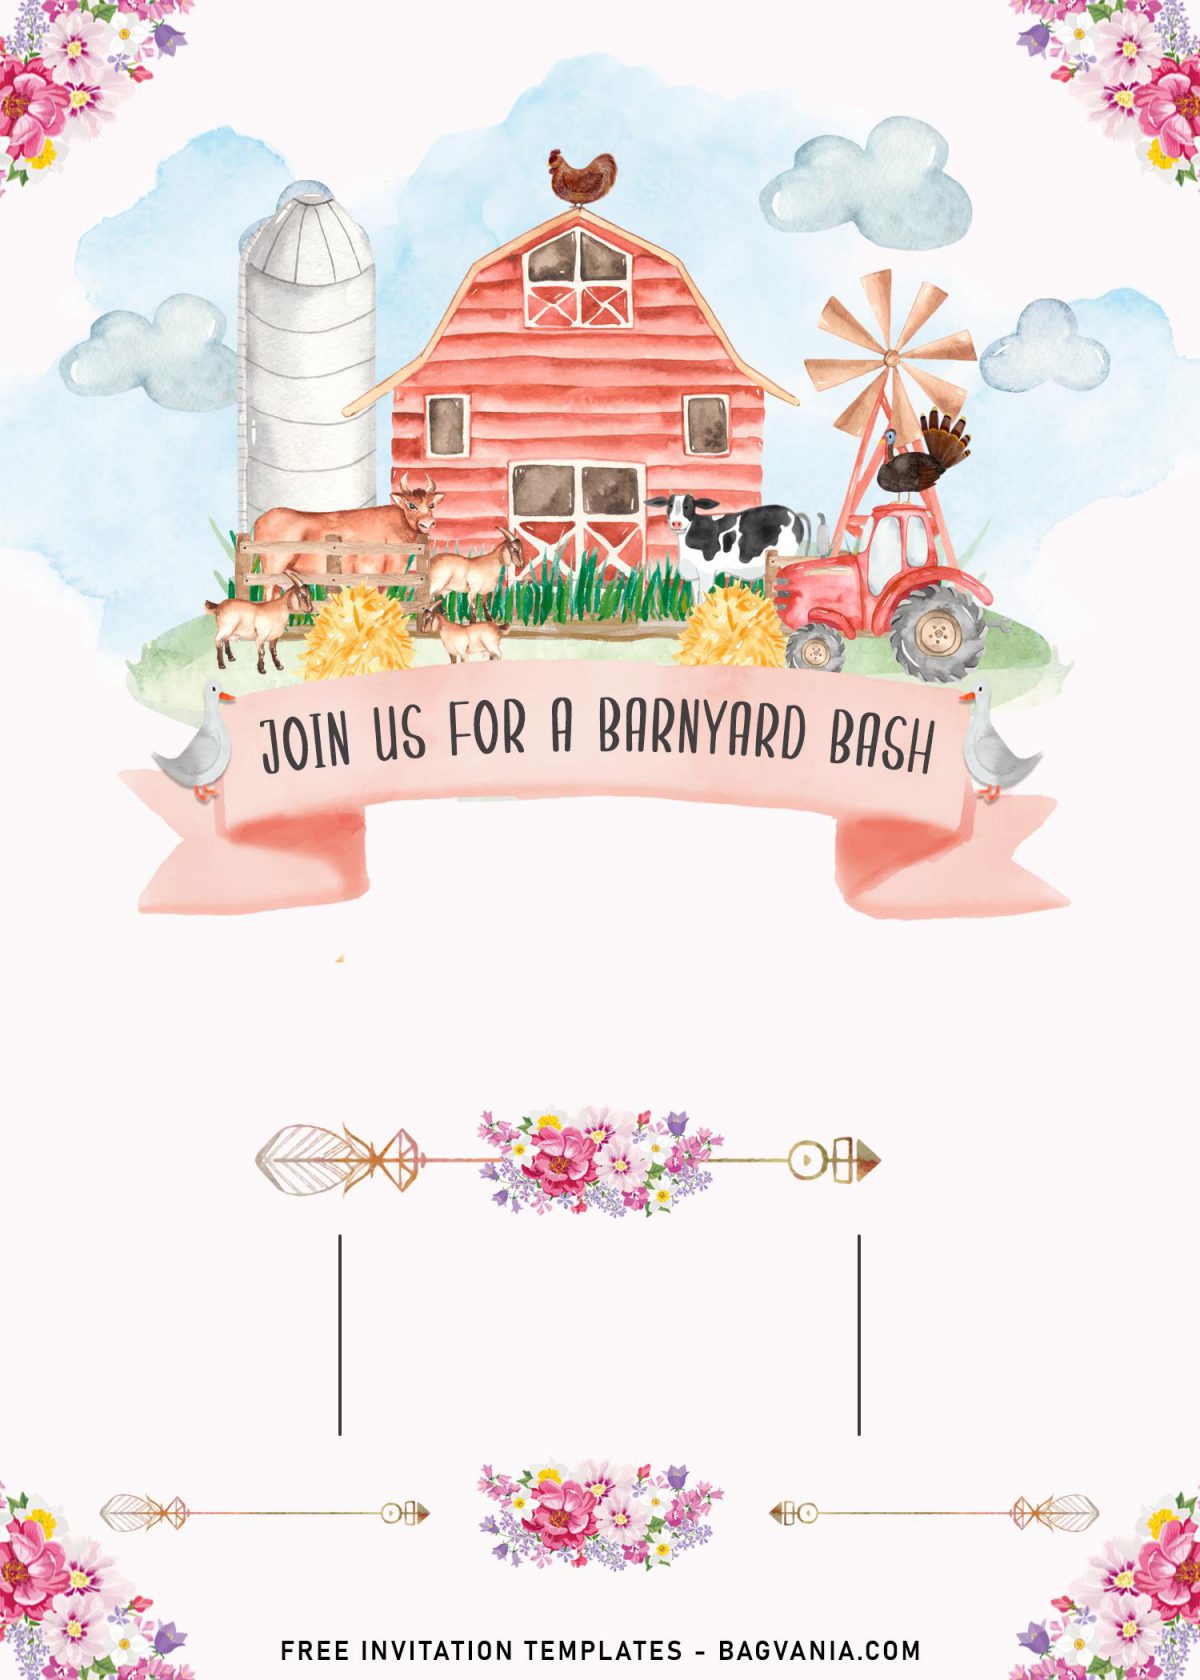 11+ Whimsical Farm Birthday Party Invitation Templates and has watercolor sky and clouds